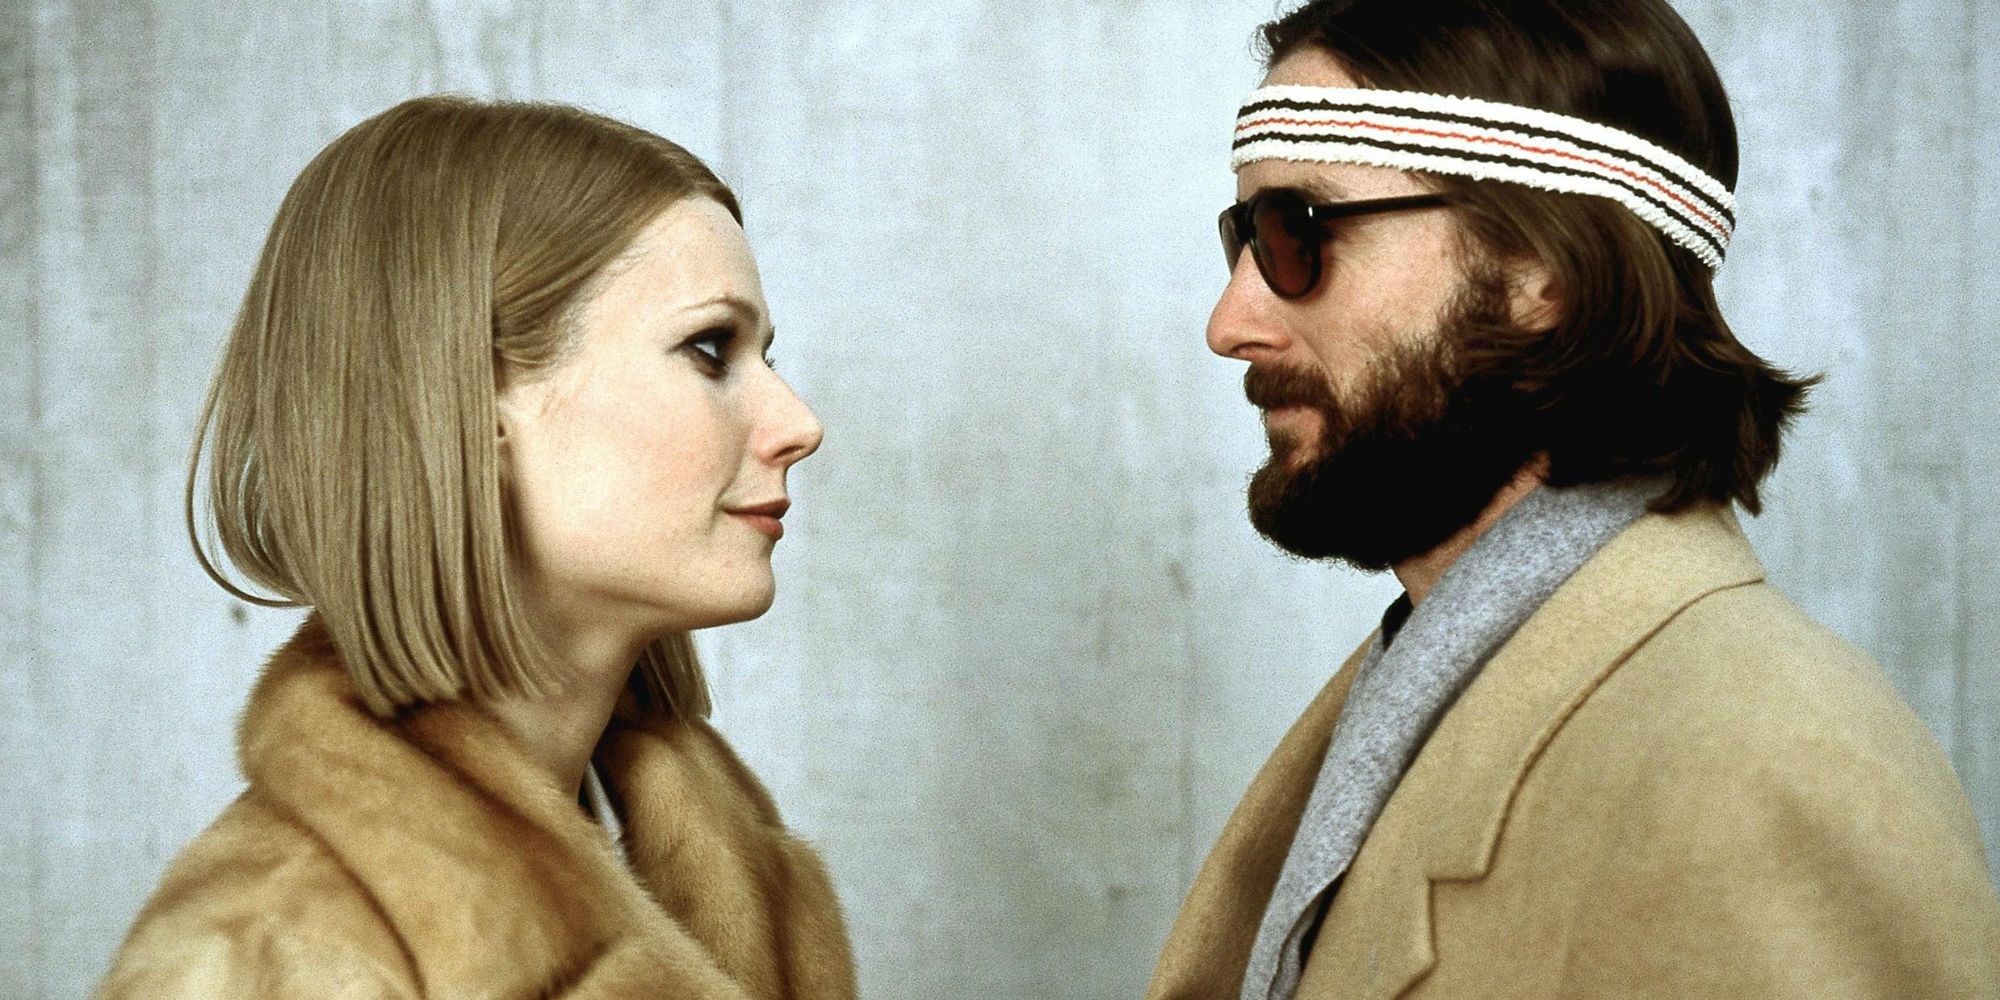 Richie and Marogt look at each other in The Royal Tenenbaums